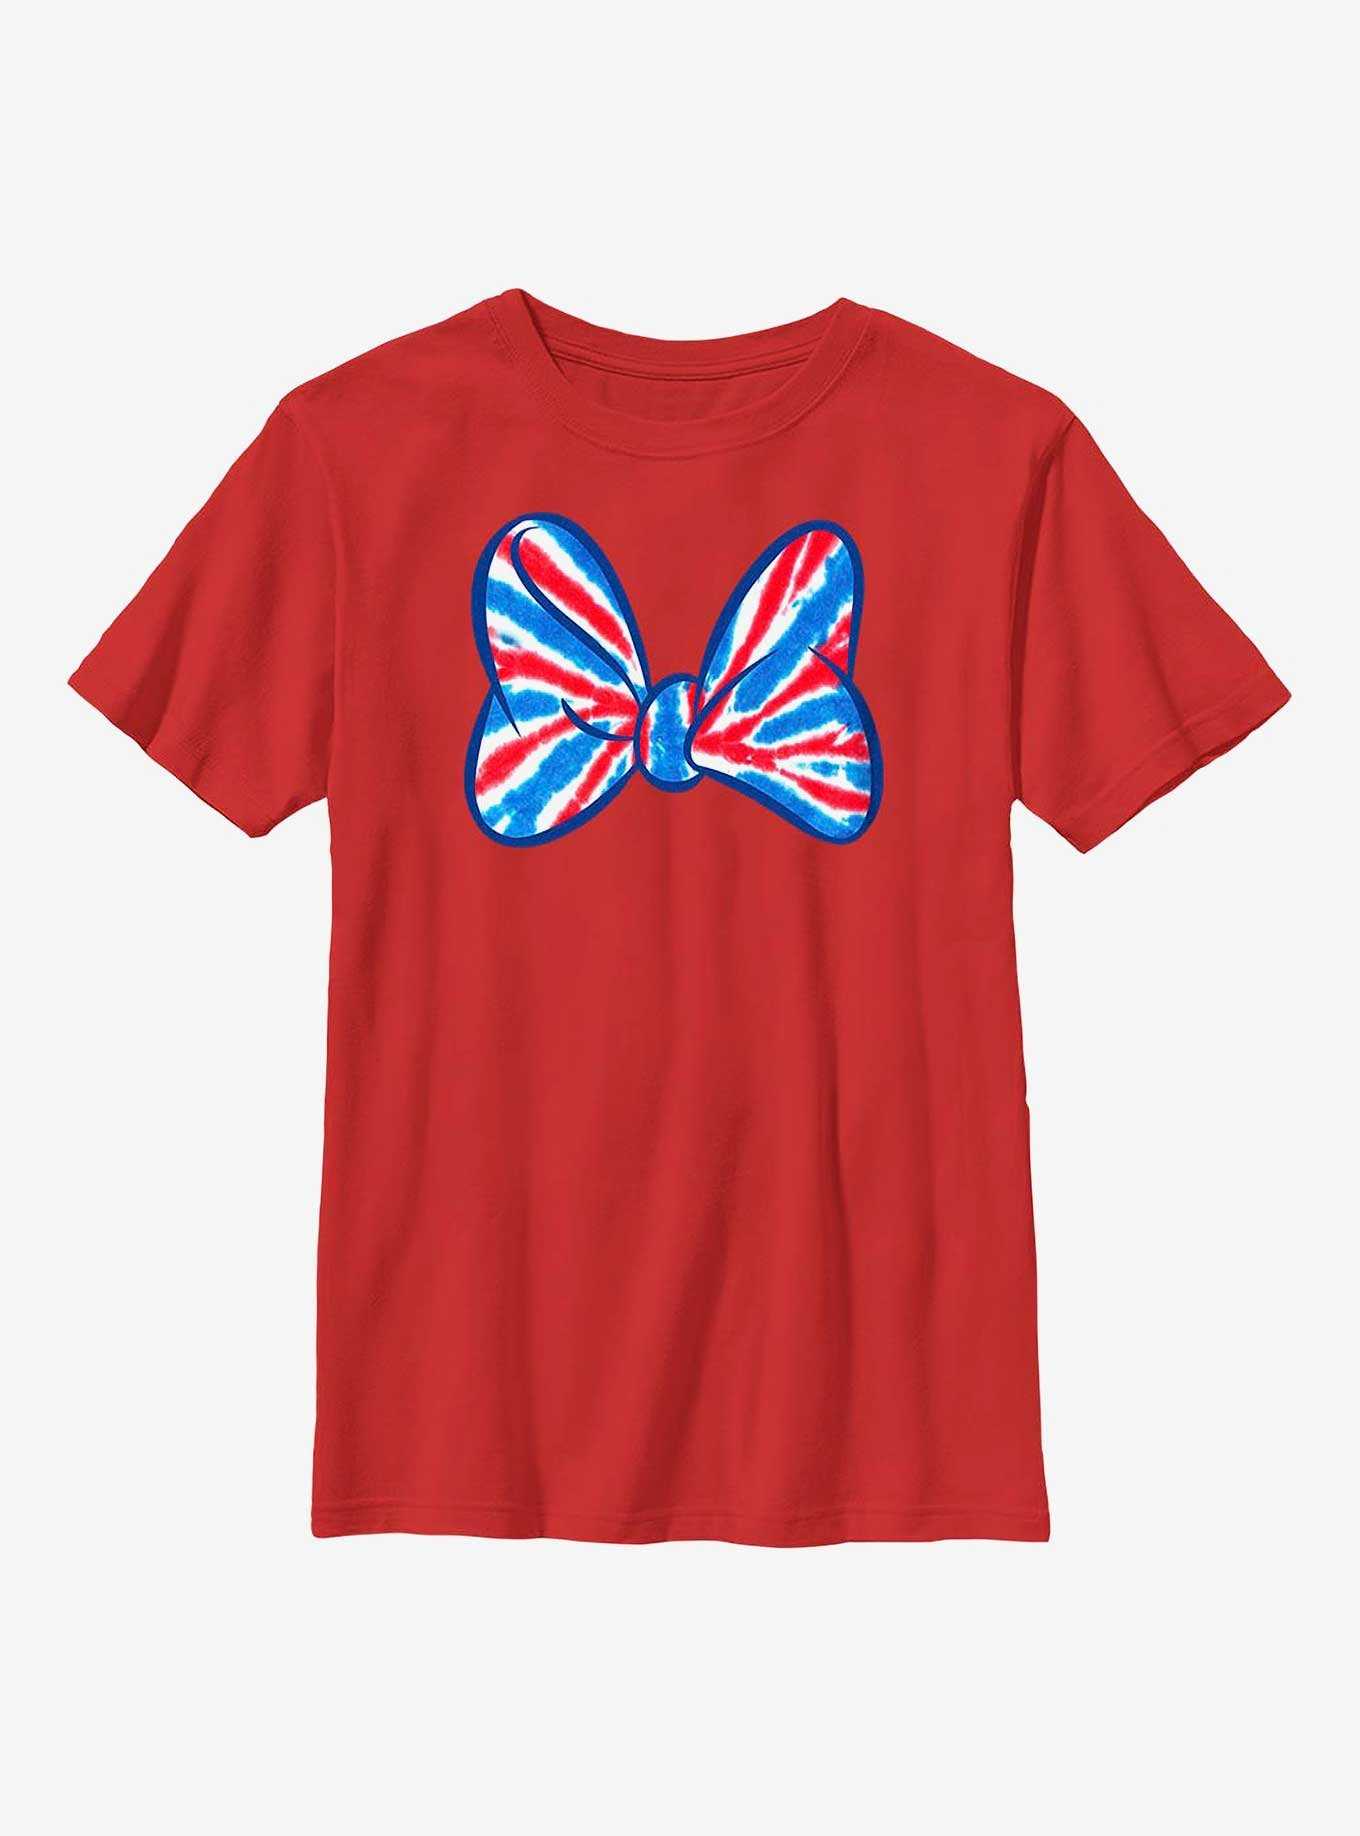 Disney Minnie Mouse Americana Bow Youth T-Shirt, , hi-res